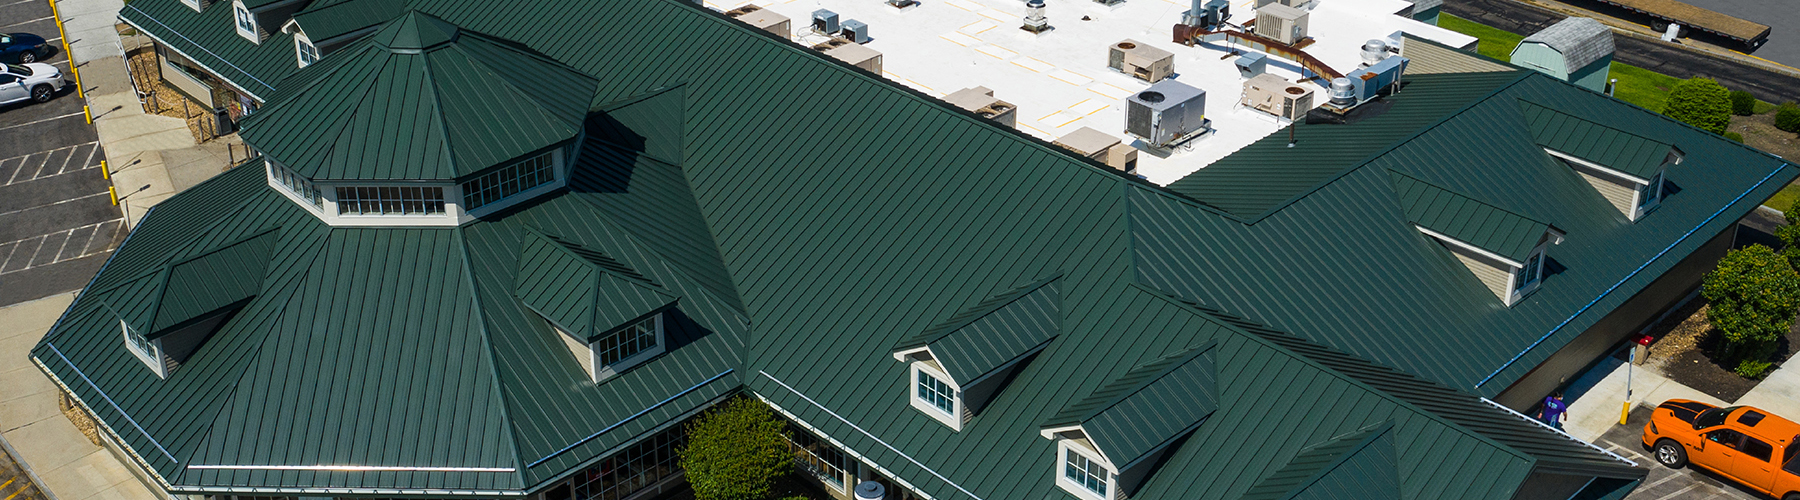 Metal Roofing and Wall Systems